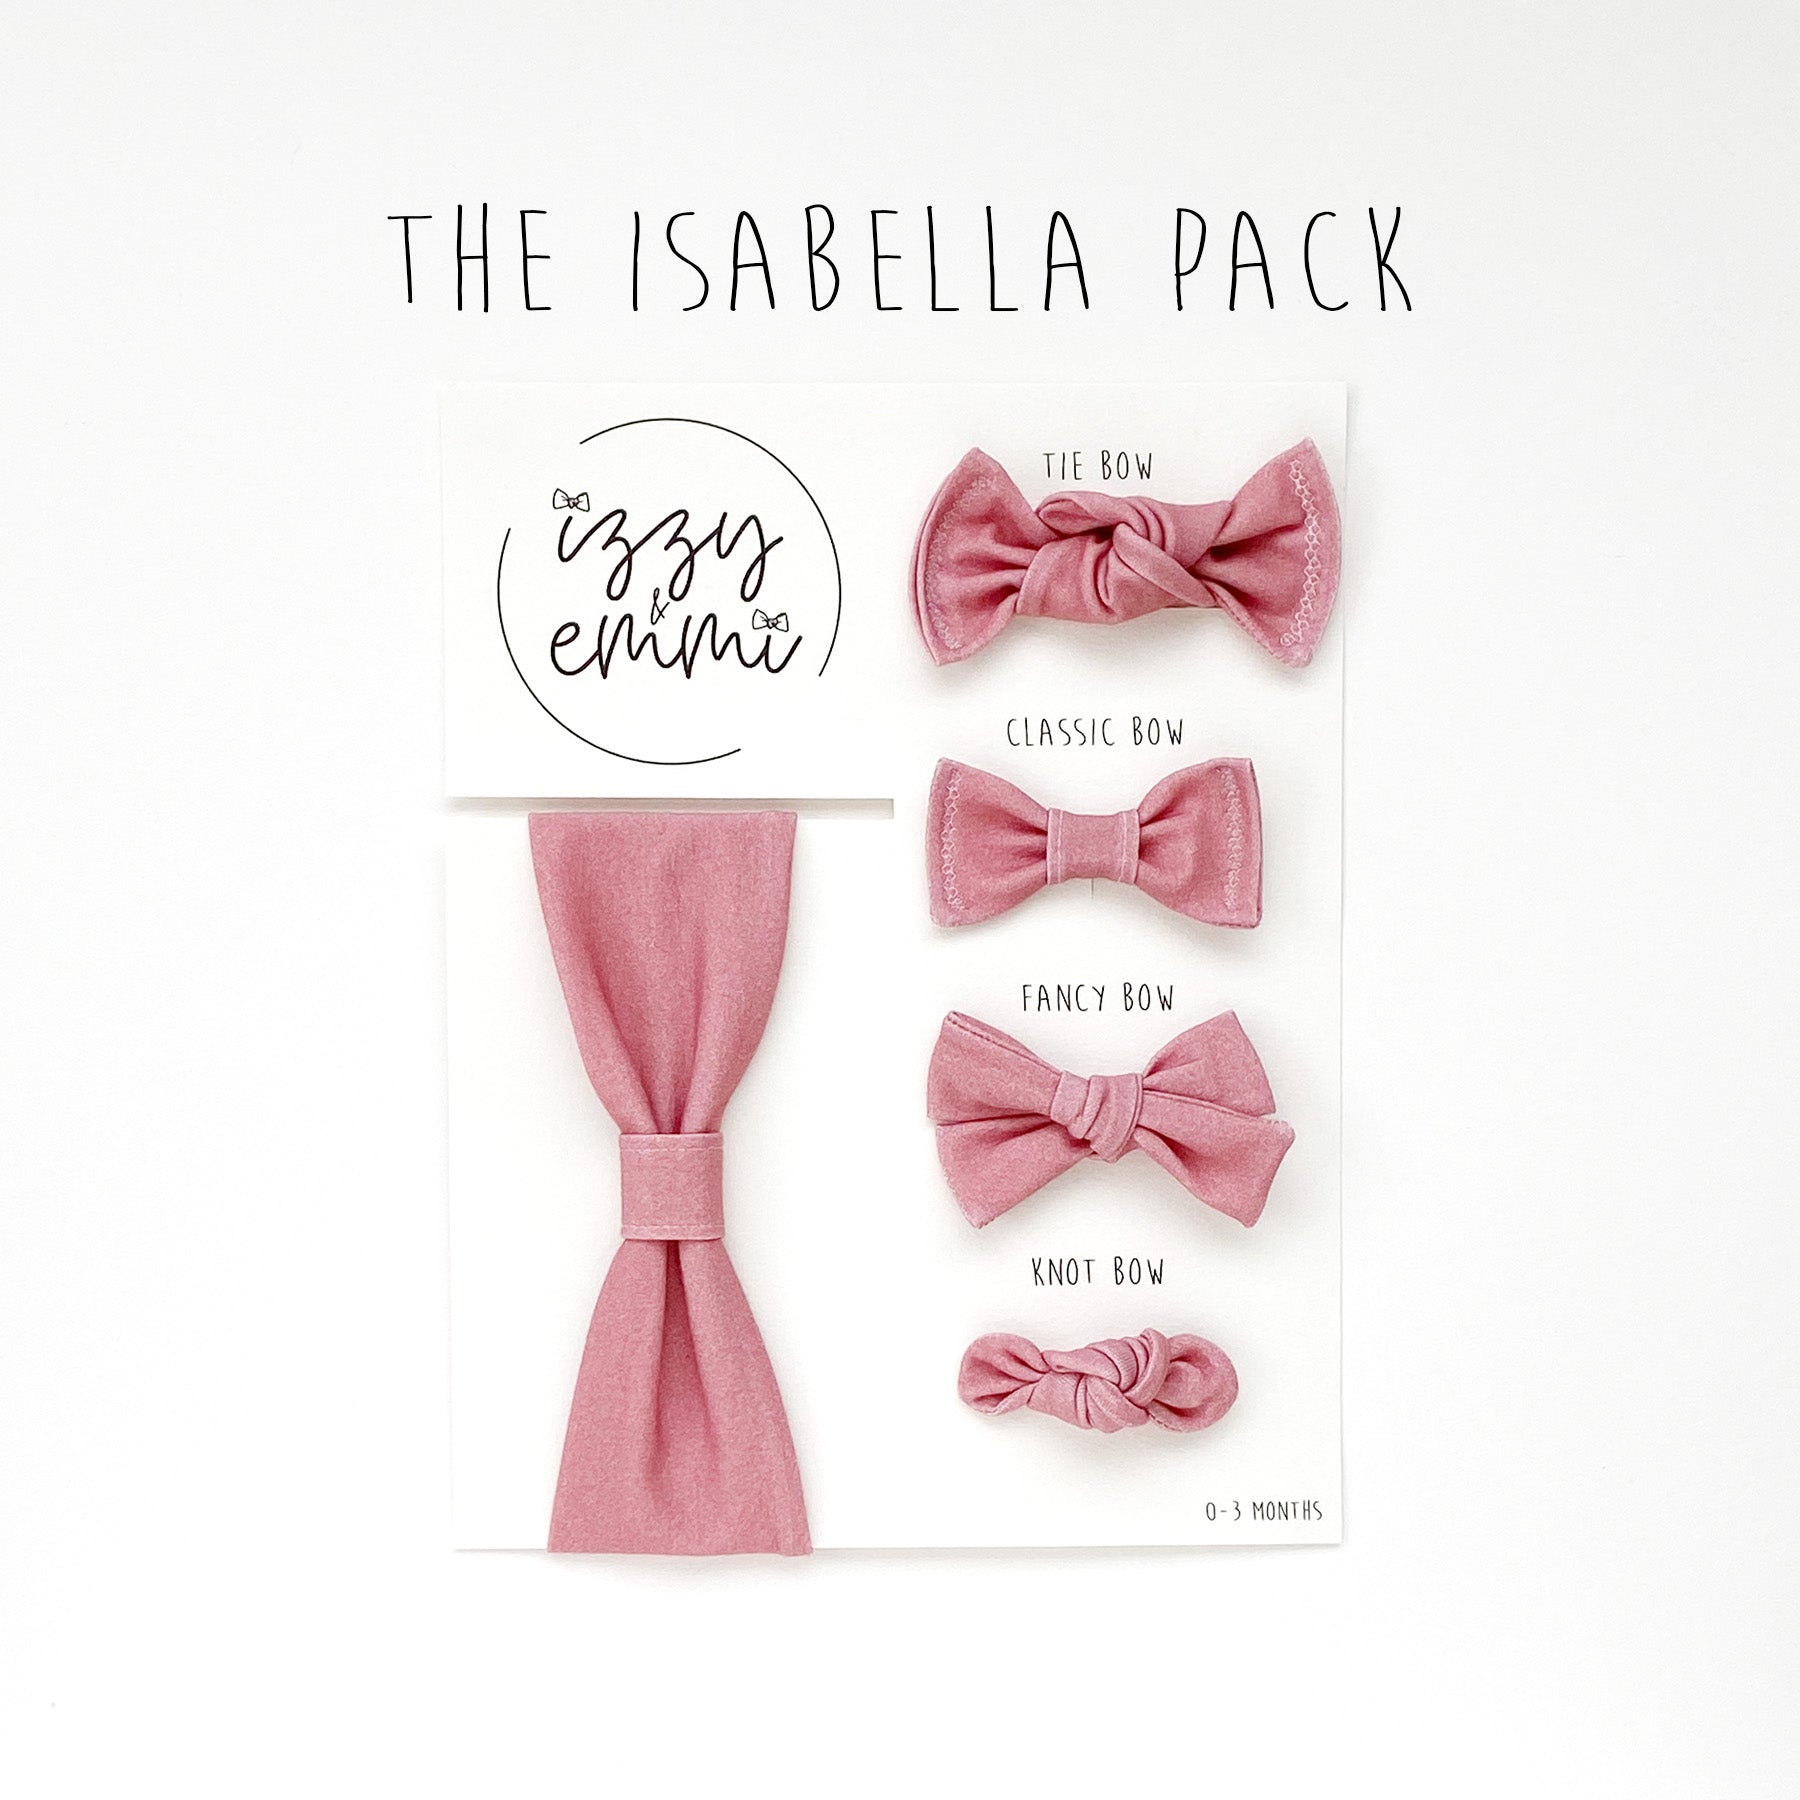 THE ISABELLA PACK